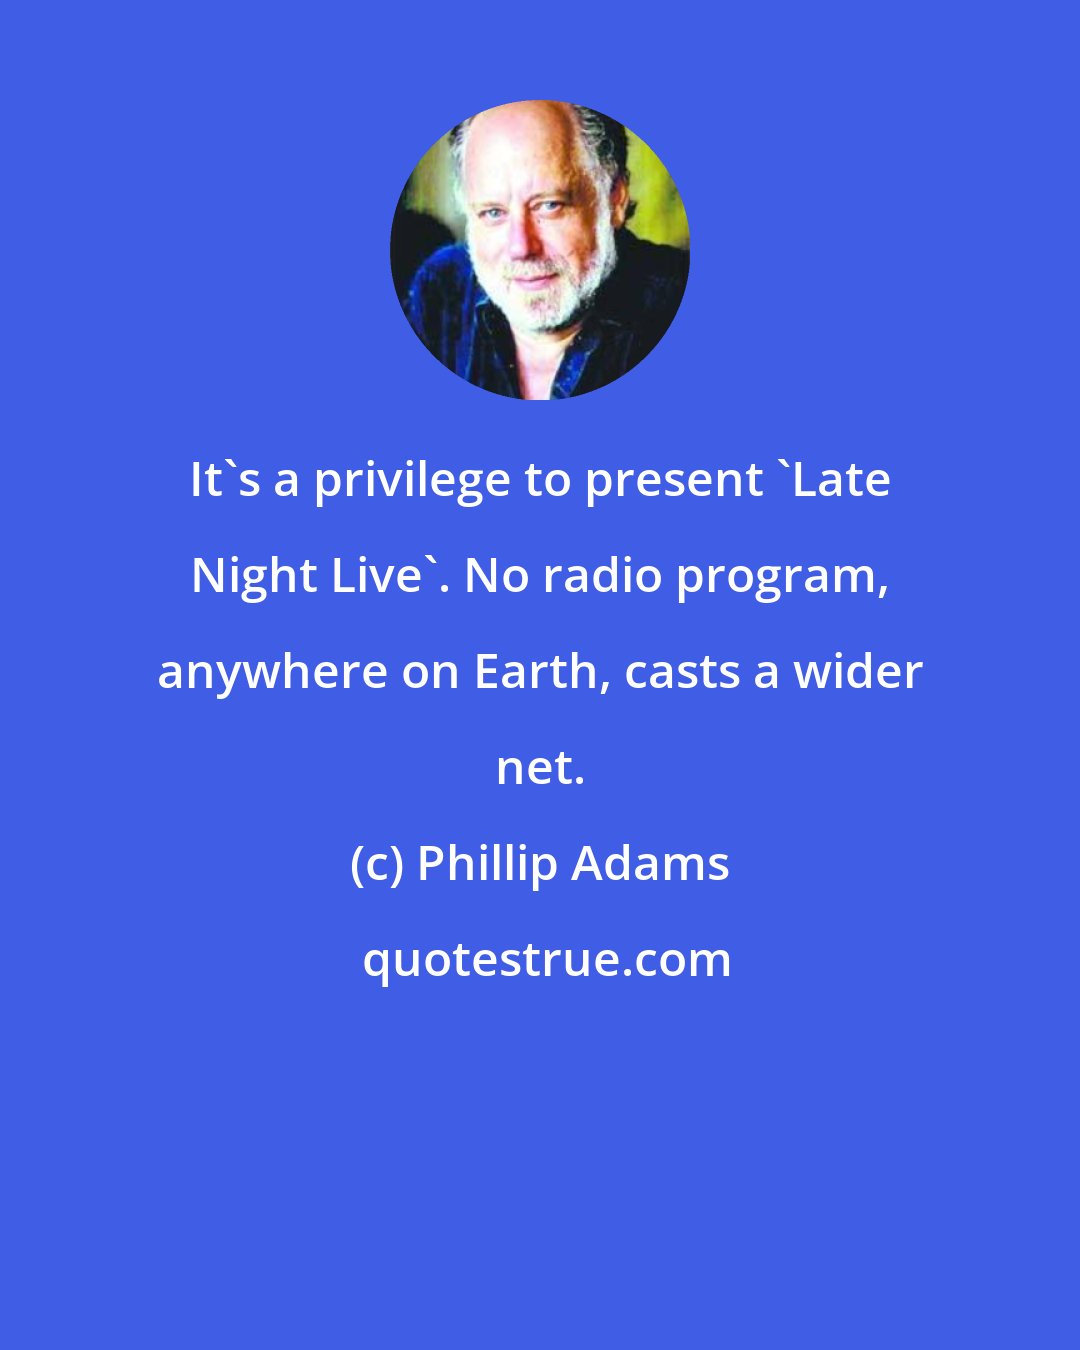 Phillip Adams: It's a privilege to present 'Late Night Live'. No radio program, anywhere on Earth, casts a wider net.